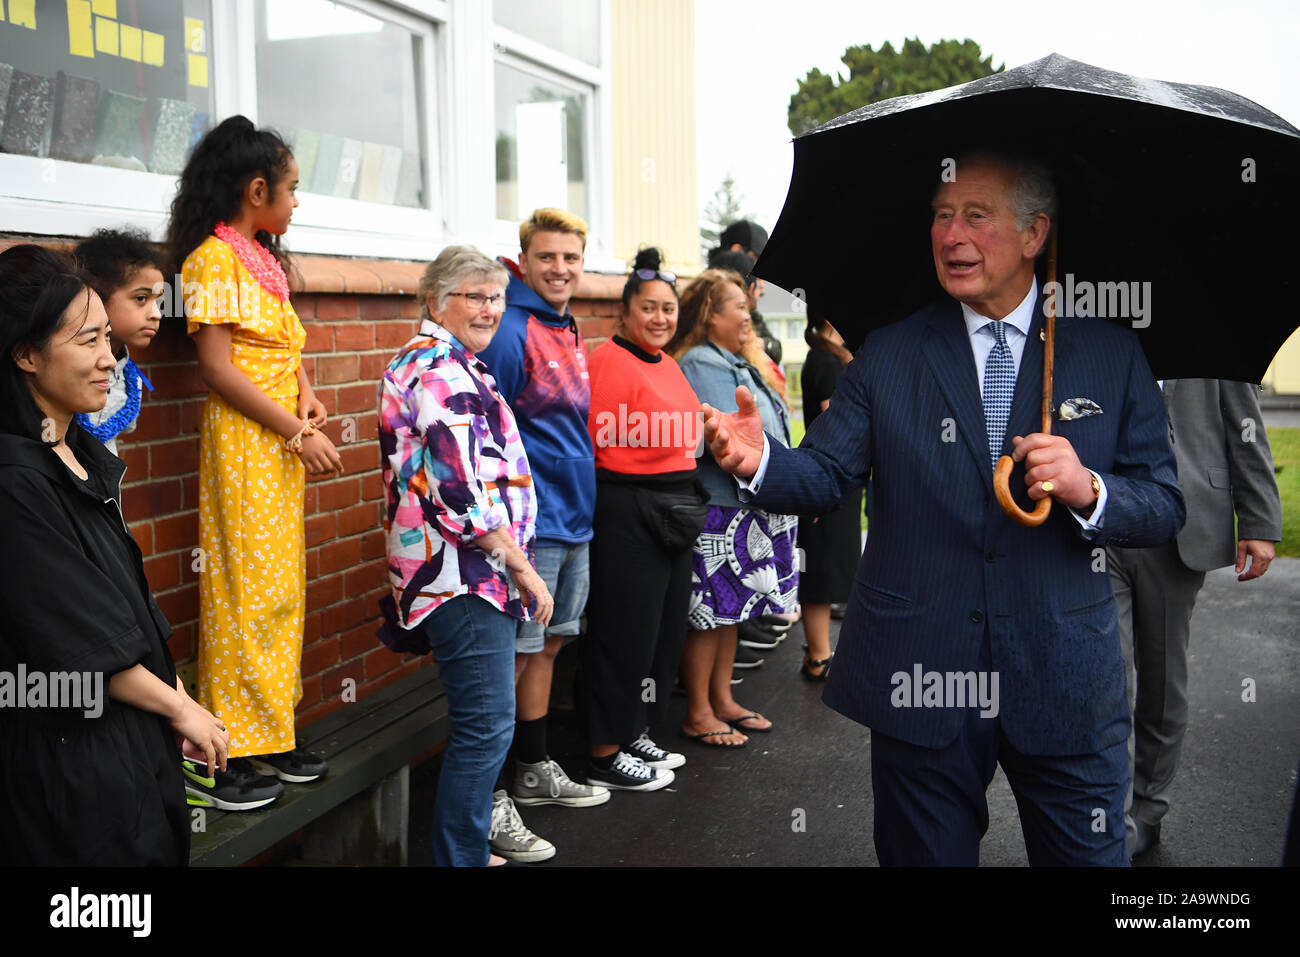 The Prince of Wales during a visit to Critical Design, an Auckland based company that manufactures a range of office and homeware products from recycled materials, at Wesley Intermediate School in Auckland on the second day of the royal visit to New Zealand. Stock Photo